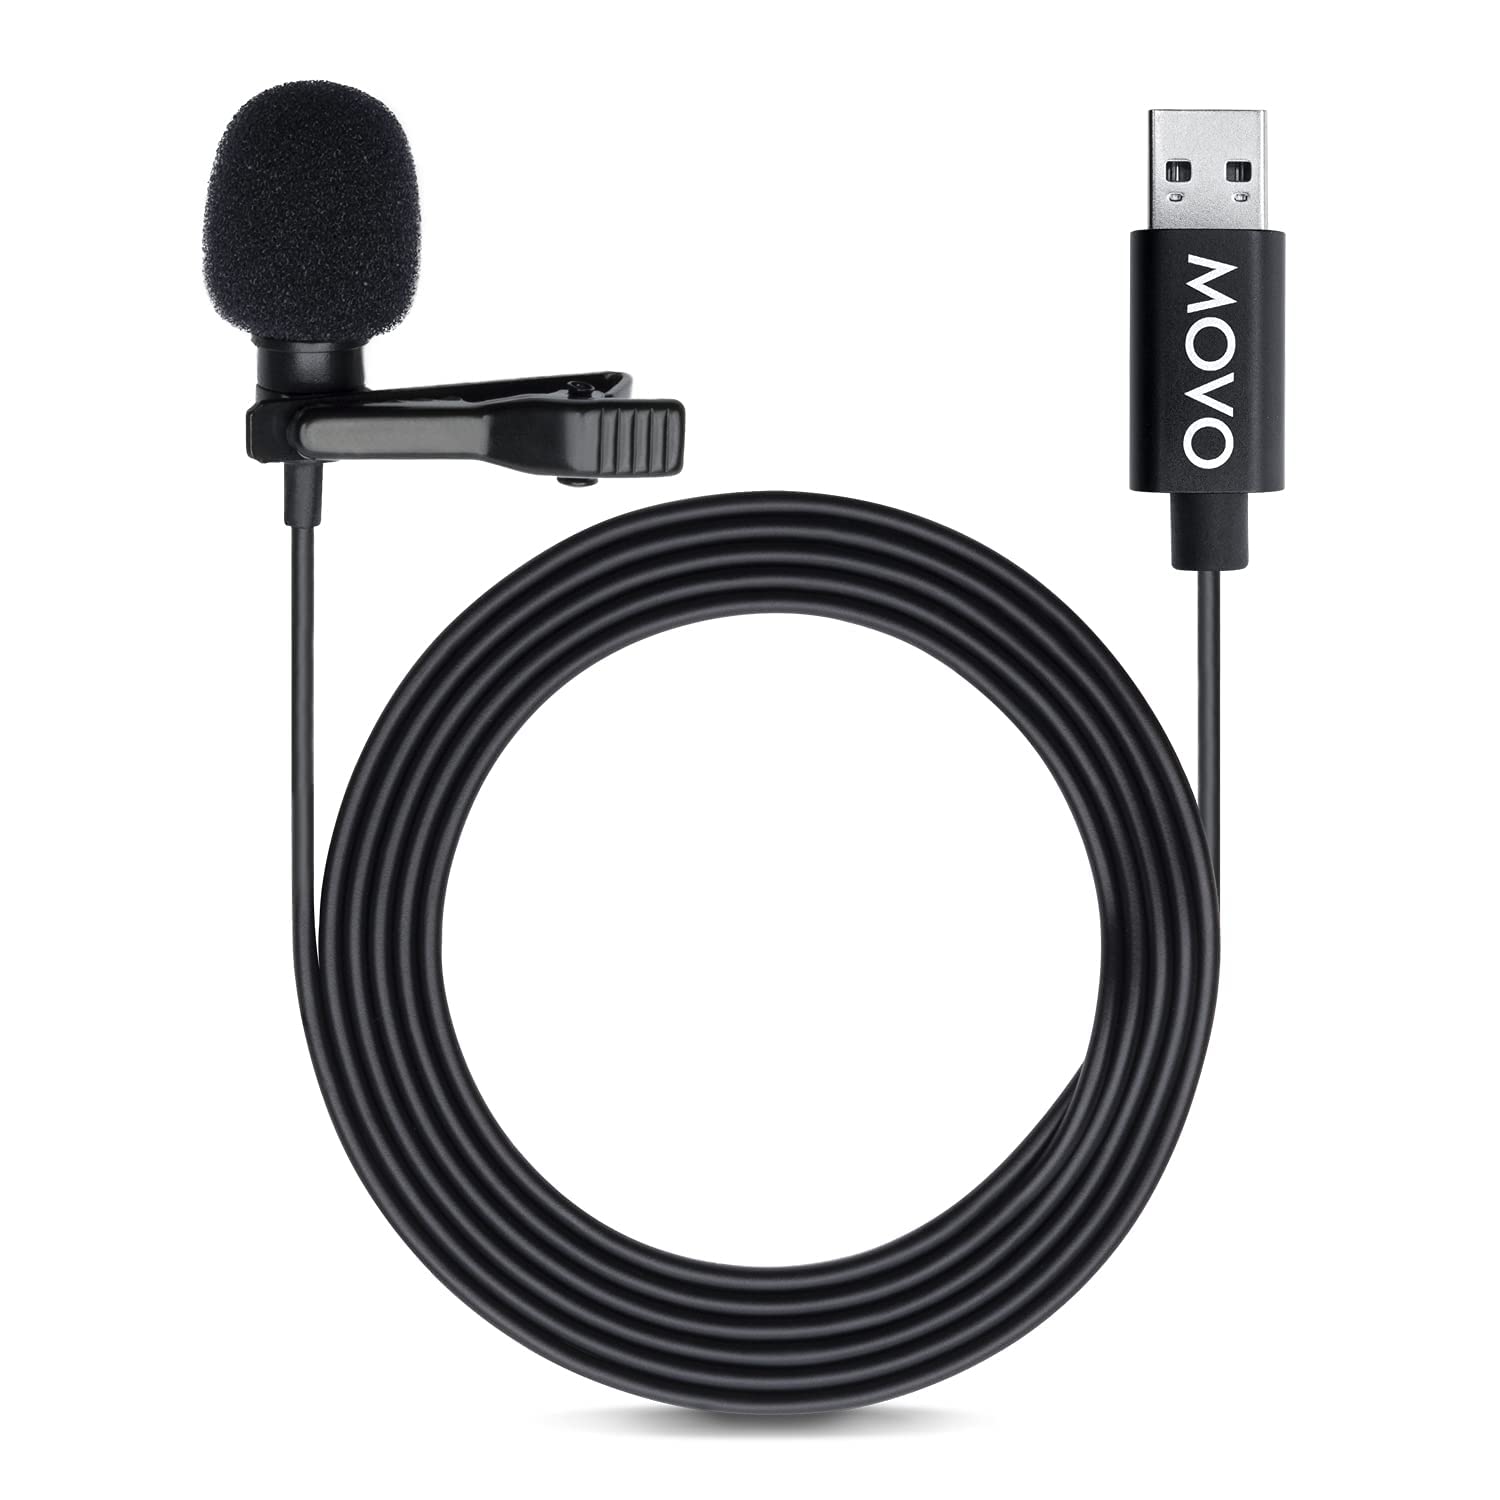 Movo M1 USB Lavalier Lapel Clip-on Omnidirectional Computer Microphone for Laptop, PC and Mac, Perfect Podcasting, Gaming, Streaming and Desktop Mic (20-Foot Cord)  - Like New